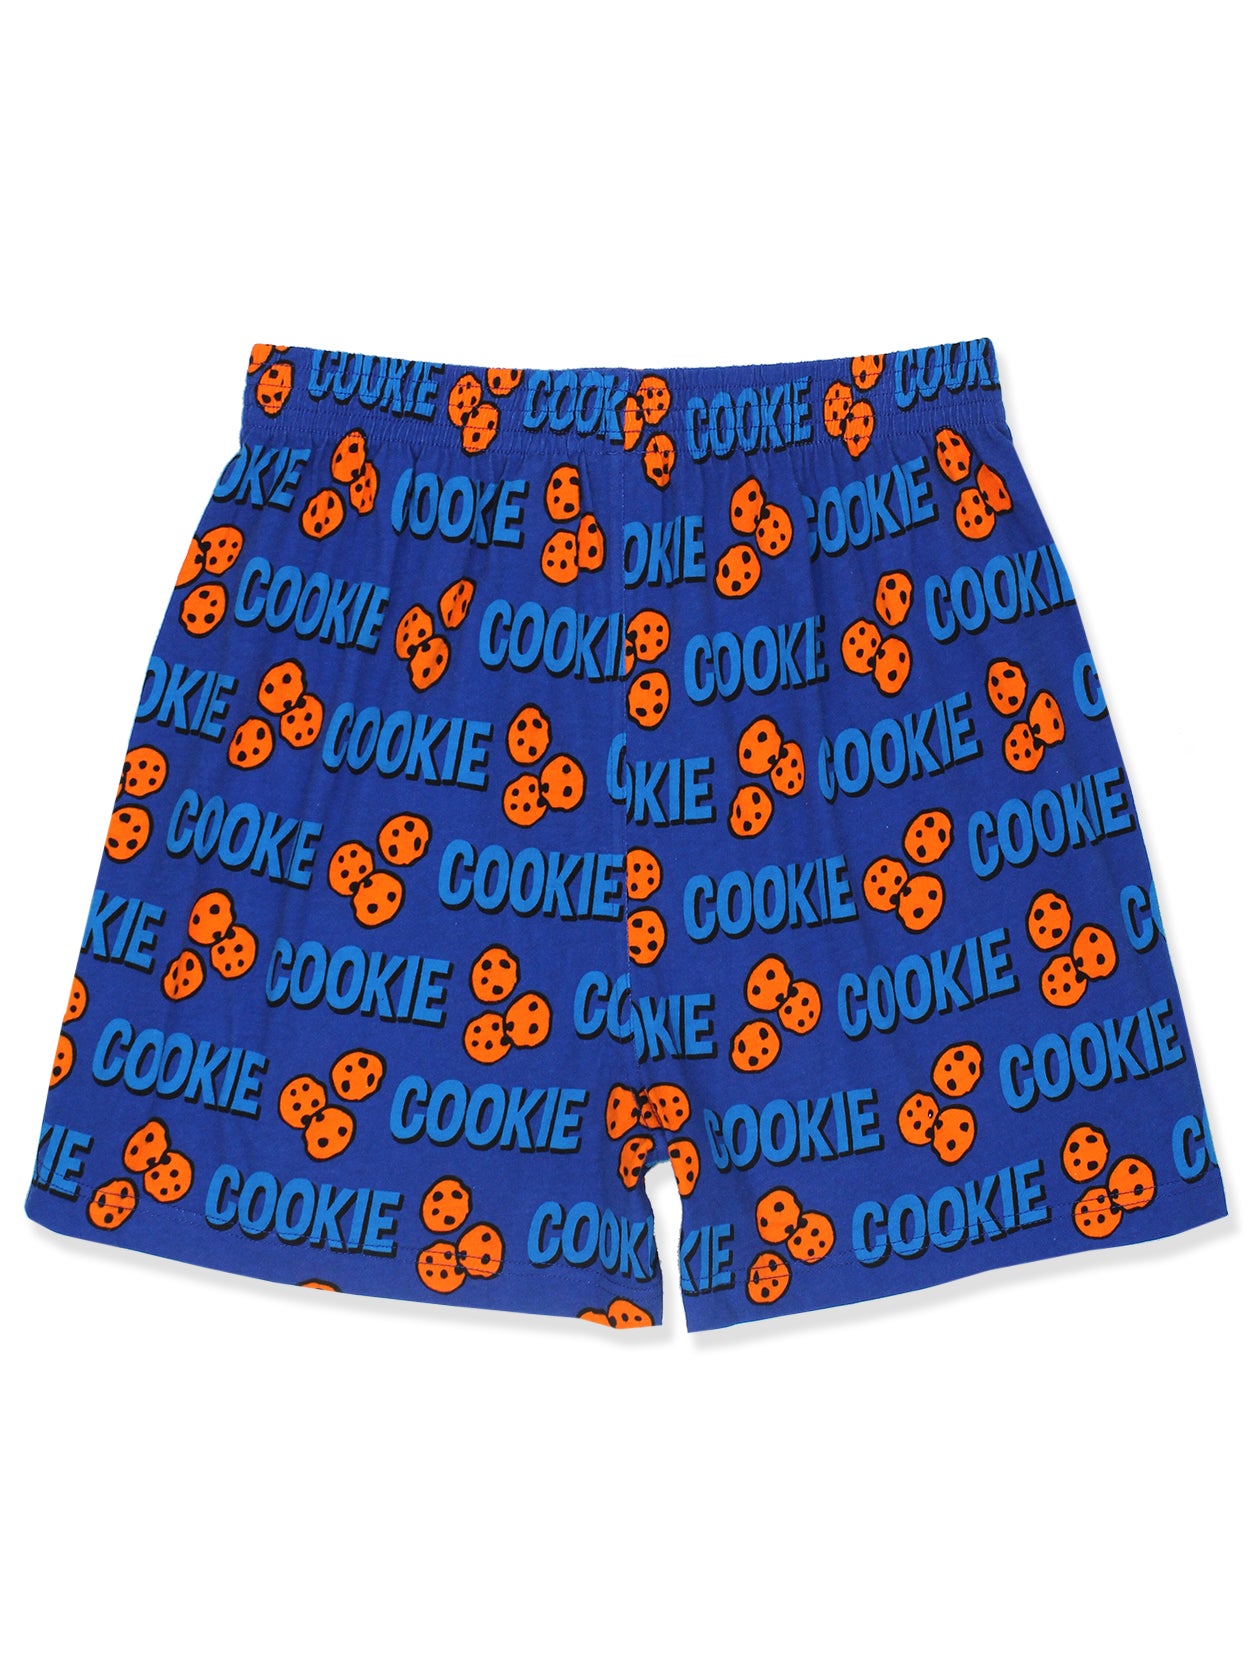 Sesame Street Cookie Monster Boxer Shorts, Brief Insanity